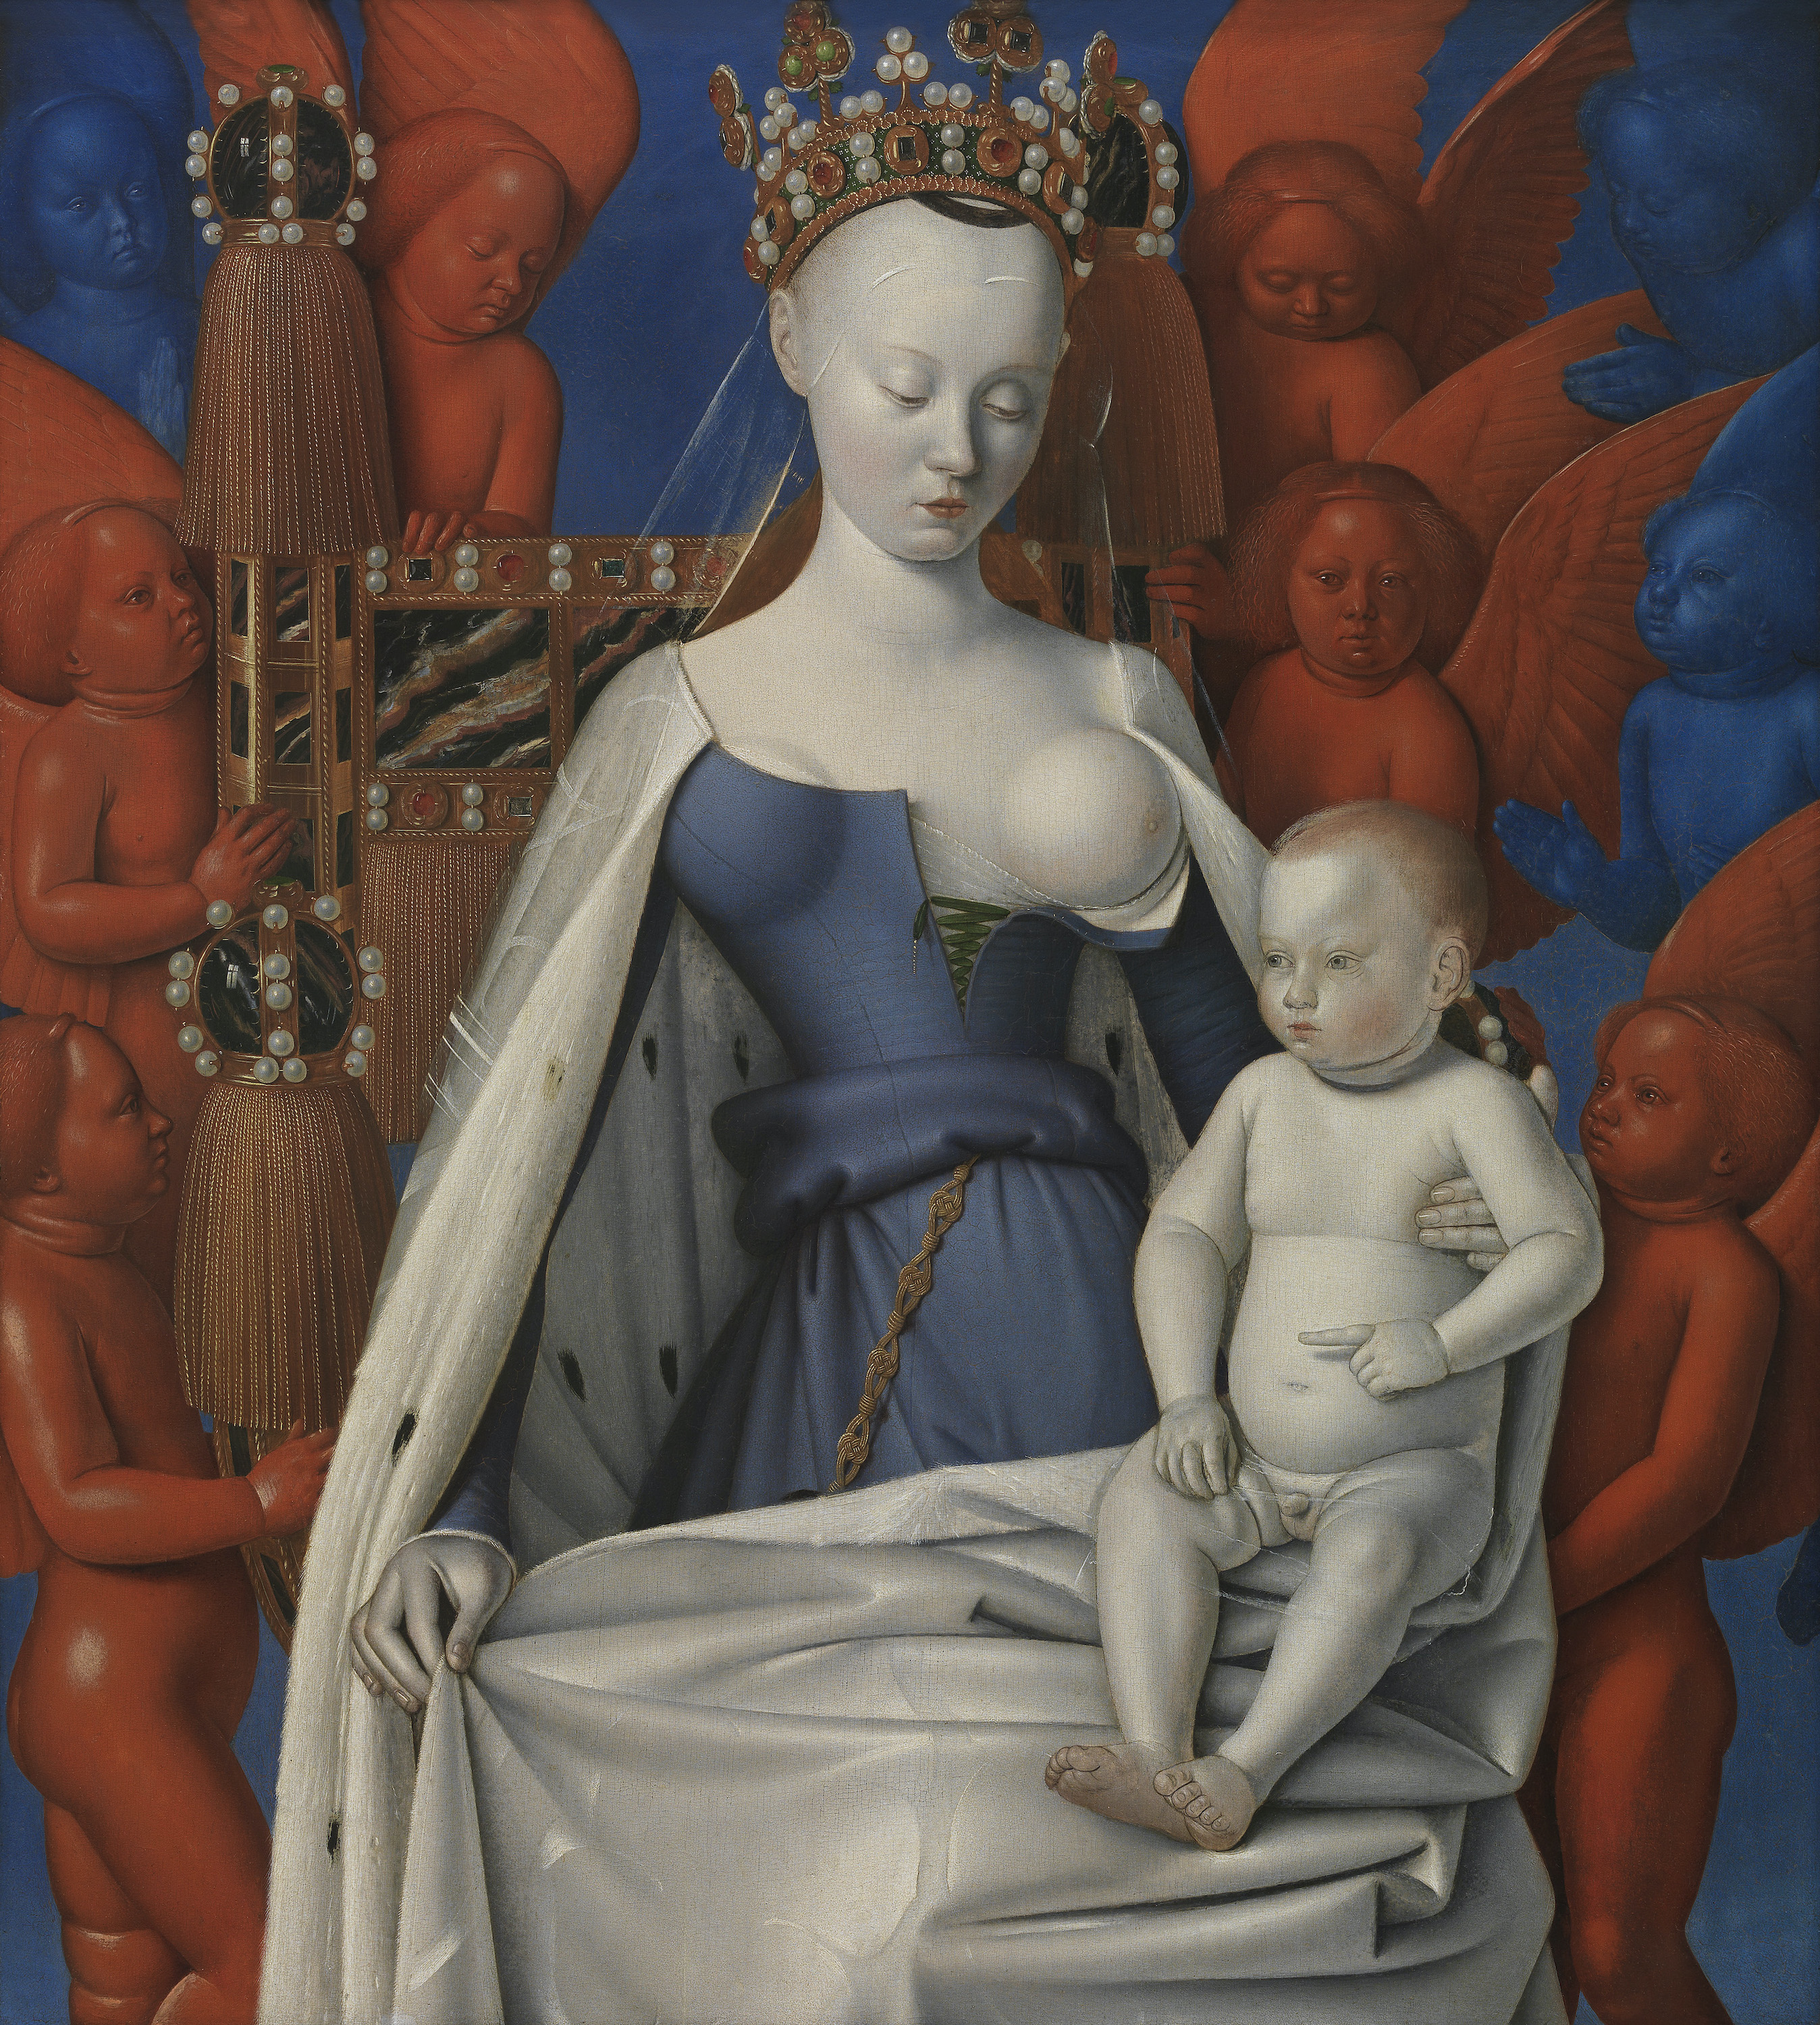 Madonna Surrounded by Seraphim and Cherubim by Jean Fouquet - 1454 - 1456 - 94 x 85 cm Royal Museum of Fine Arts in Antwerp (KMSKA)